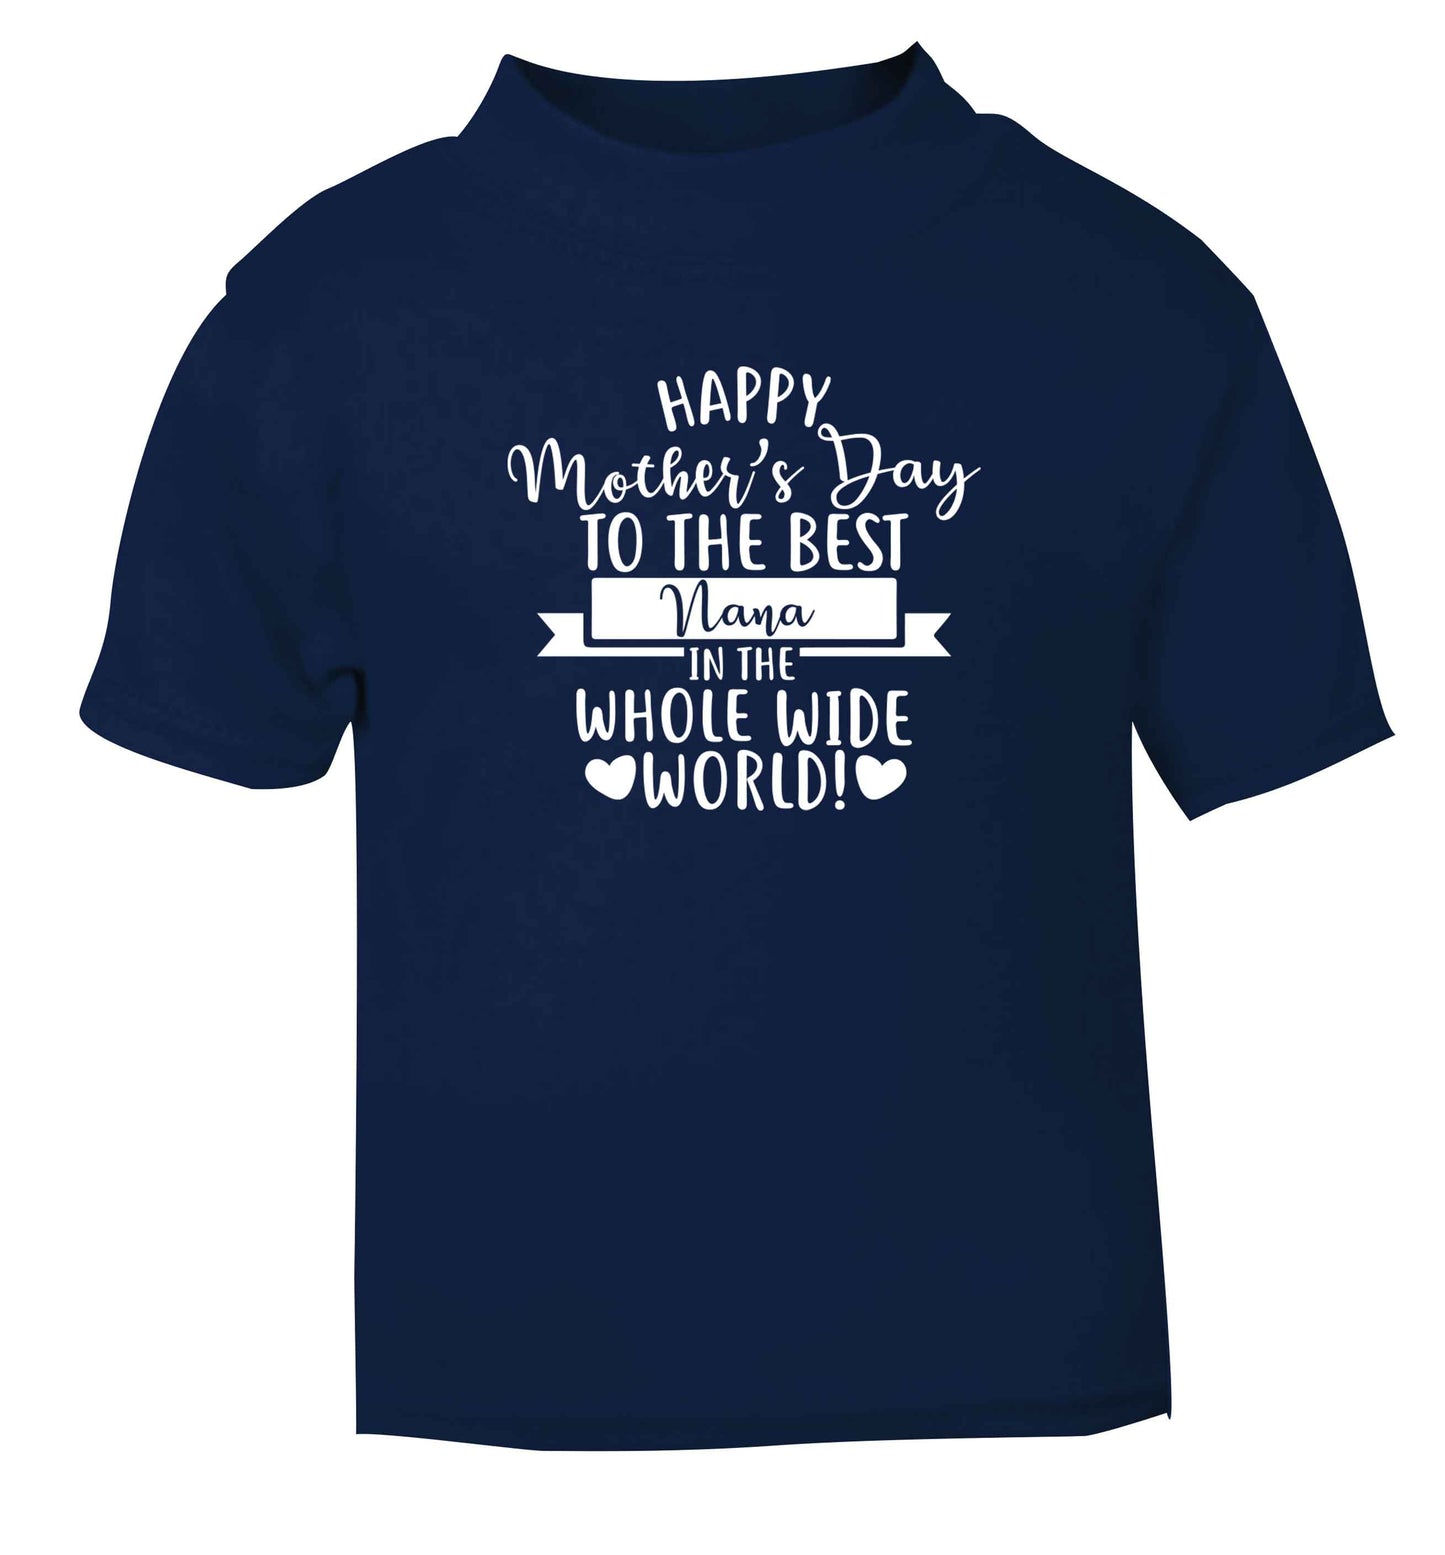 Happy mother's day to the best nana in the world navy baby toddler Tshirt 2 Years